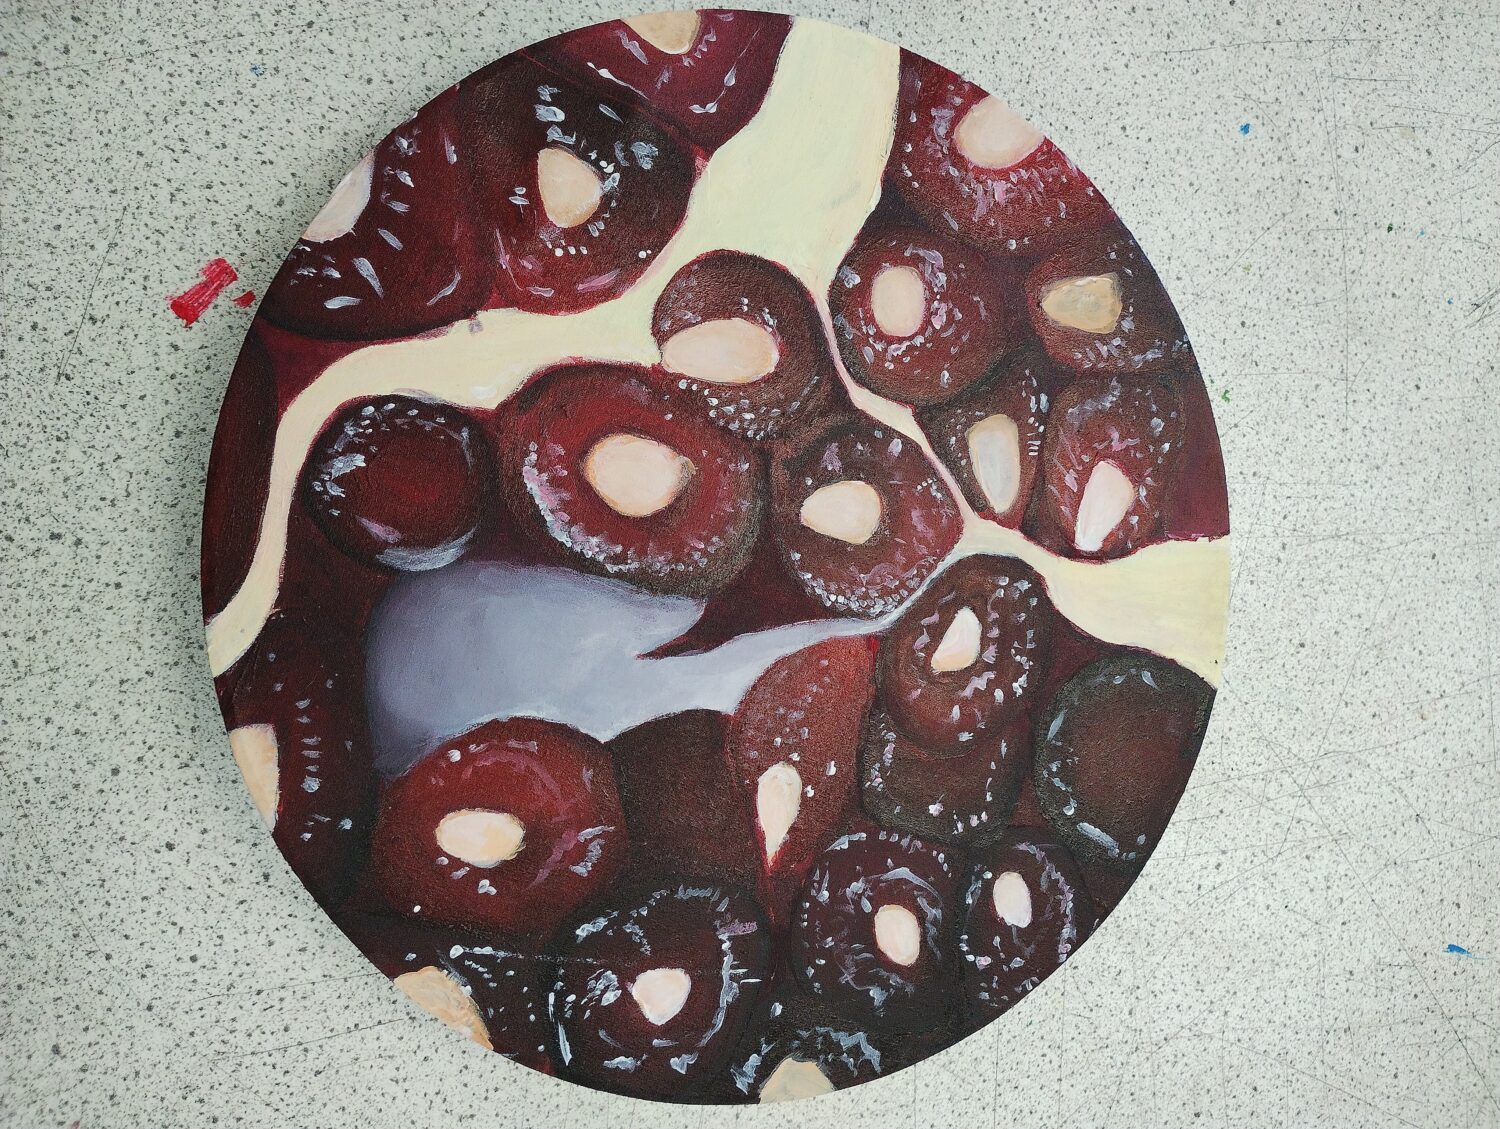 A student's artwork of a pomegranate